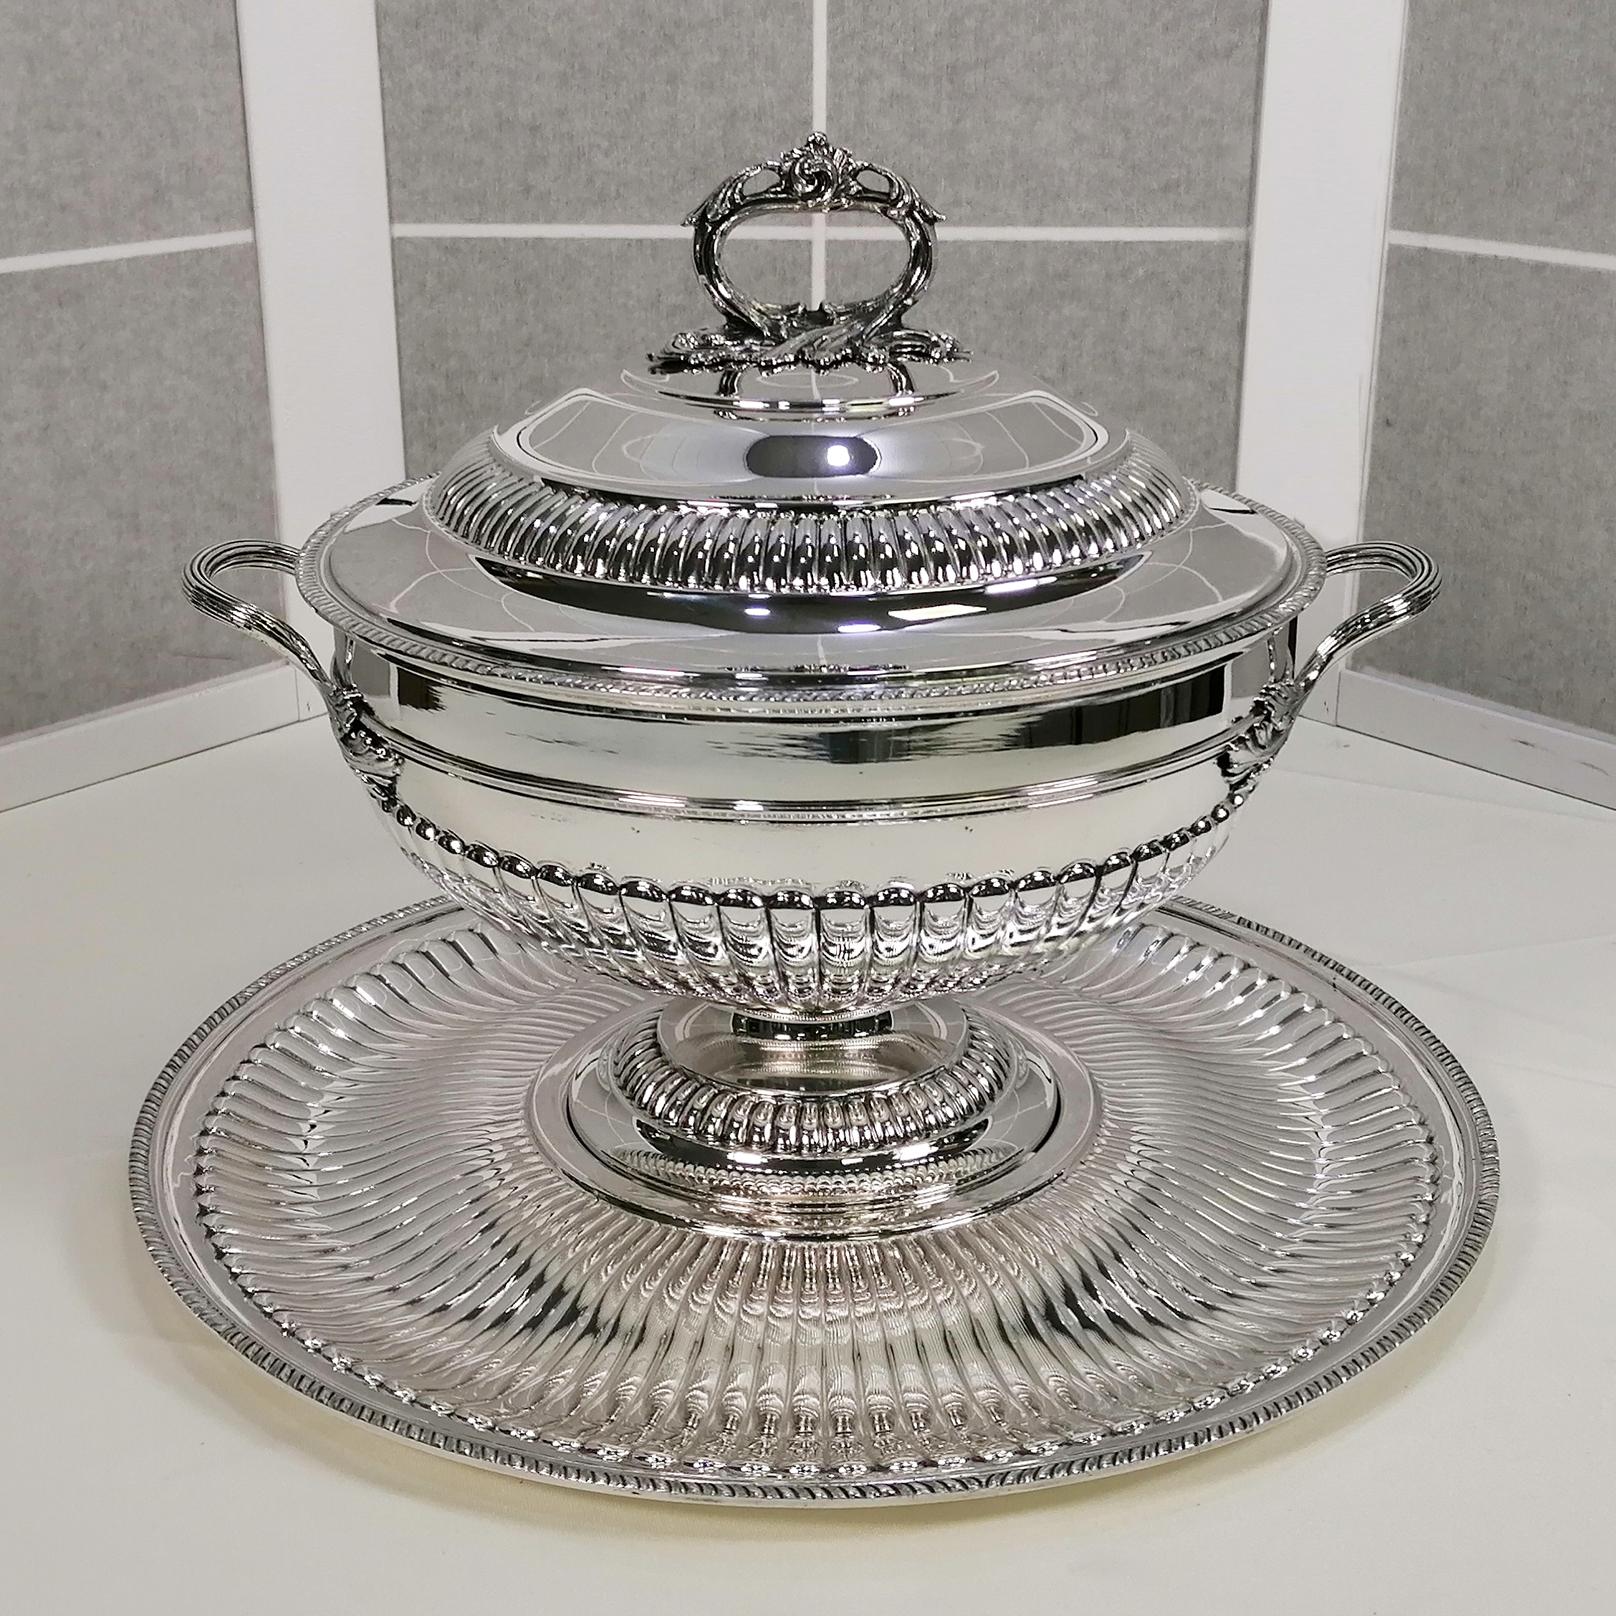 Large tureen with stand in sterling silver in Queen Anne style.
The round dish is embossed with a rounded striped design. The center of the plate has been raised as a cantilever where the tureen will be placed. The center of the stand was made